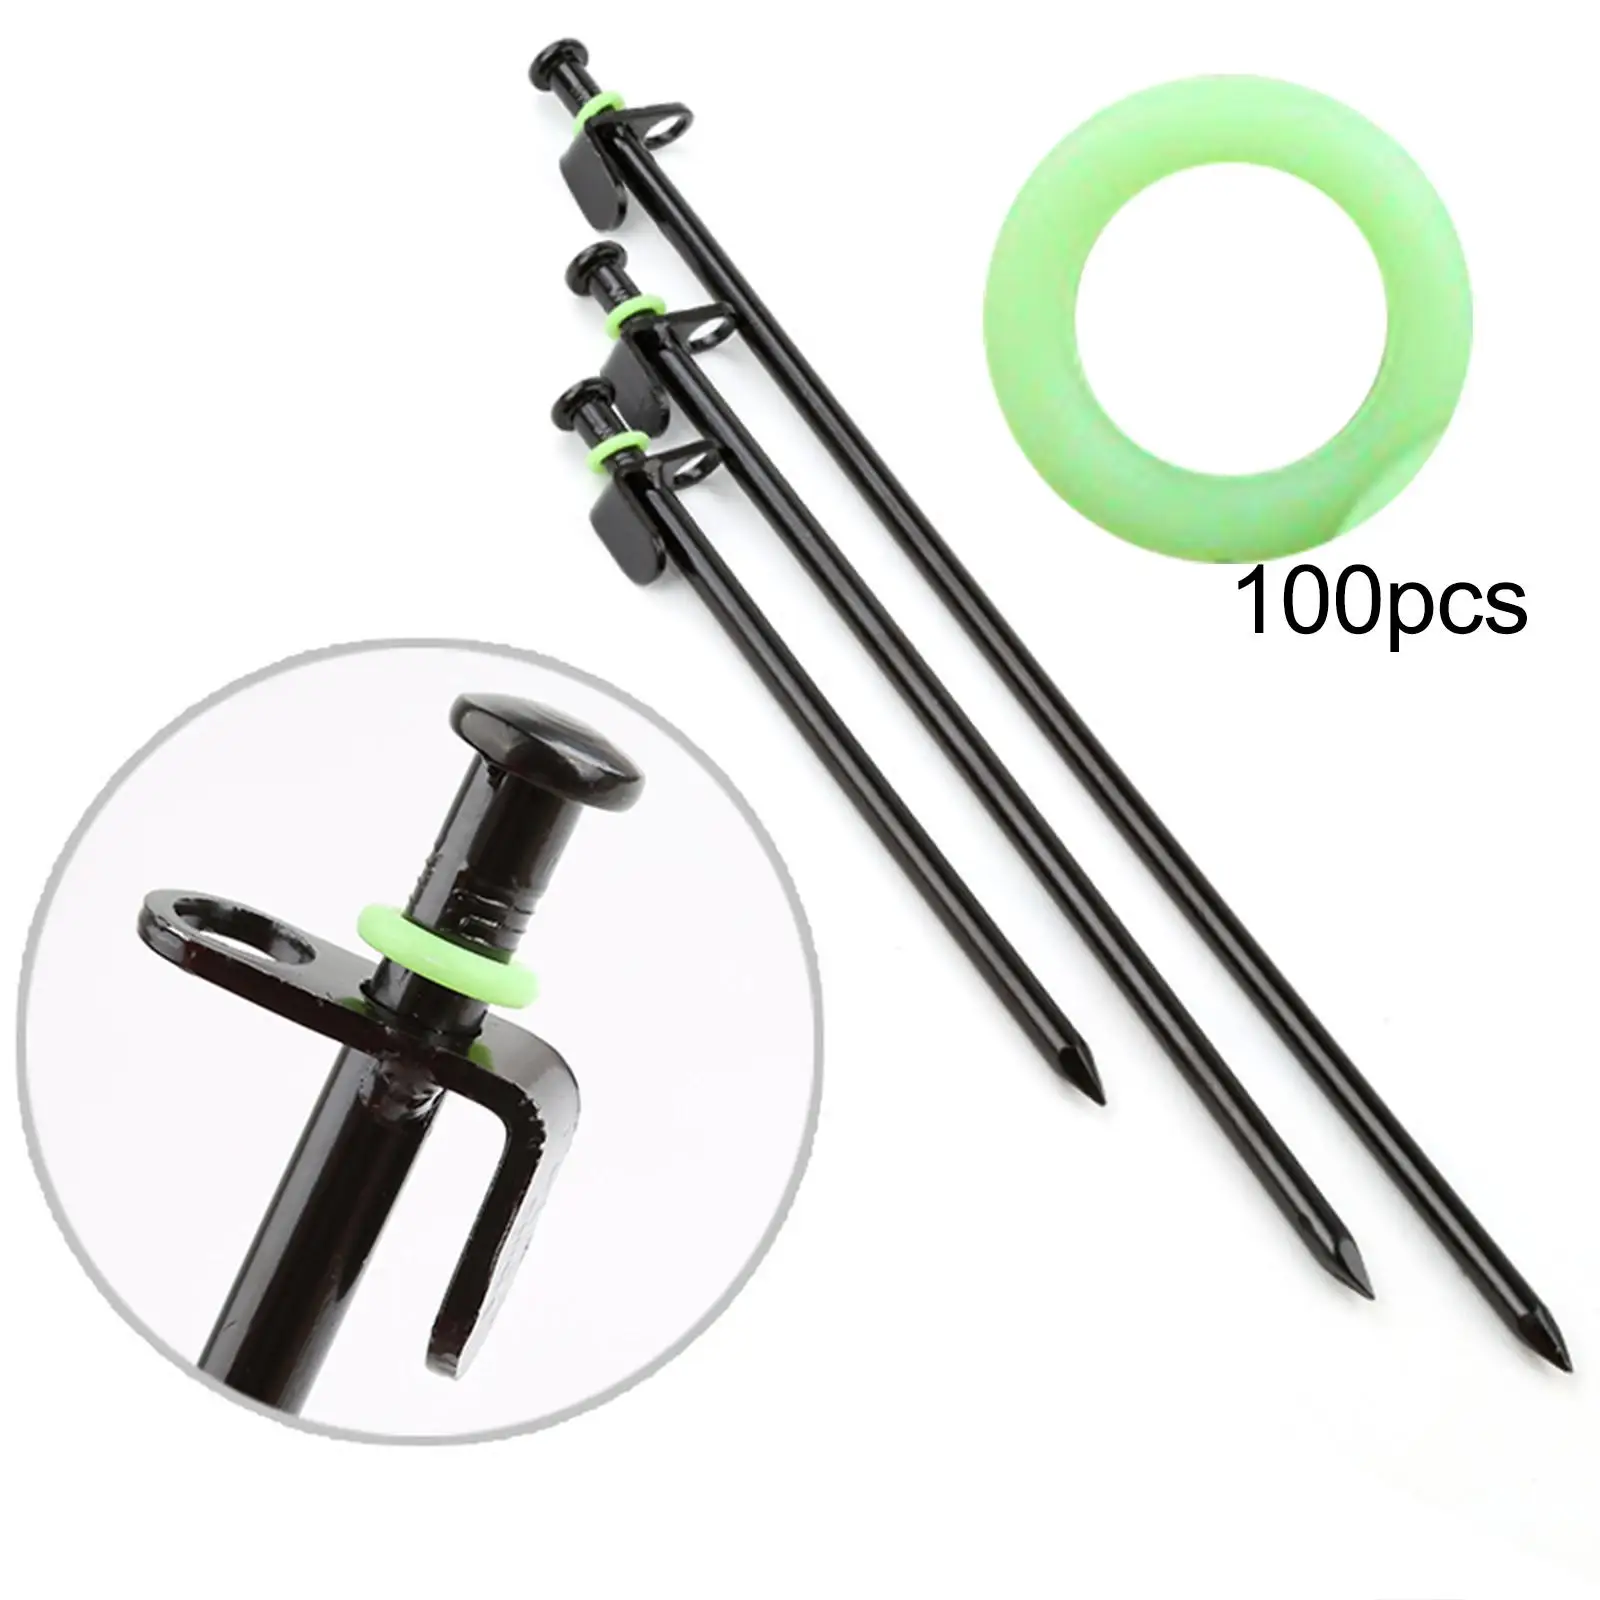 100Pcs Tent Stake Rings Luminous Glow in The Dark 15mm Tent Peg Rings Tent Nail Rings Tent Stake Accessories for Outdoor Camping